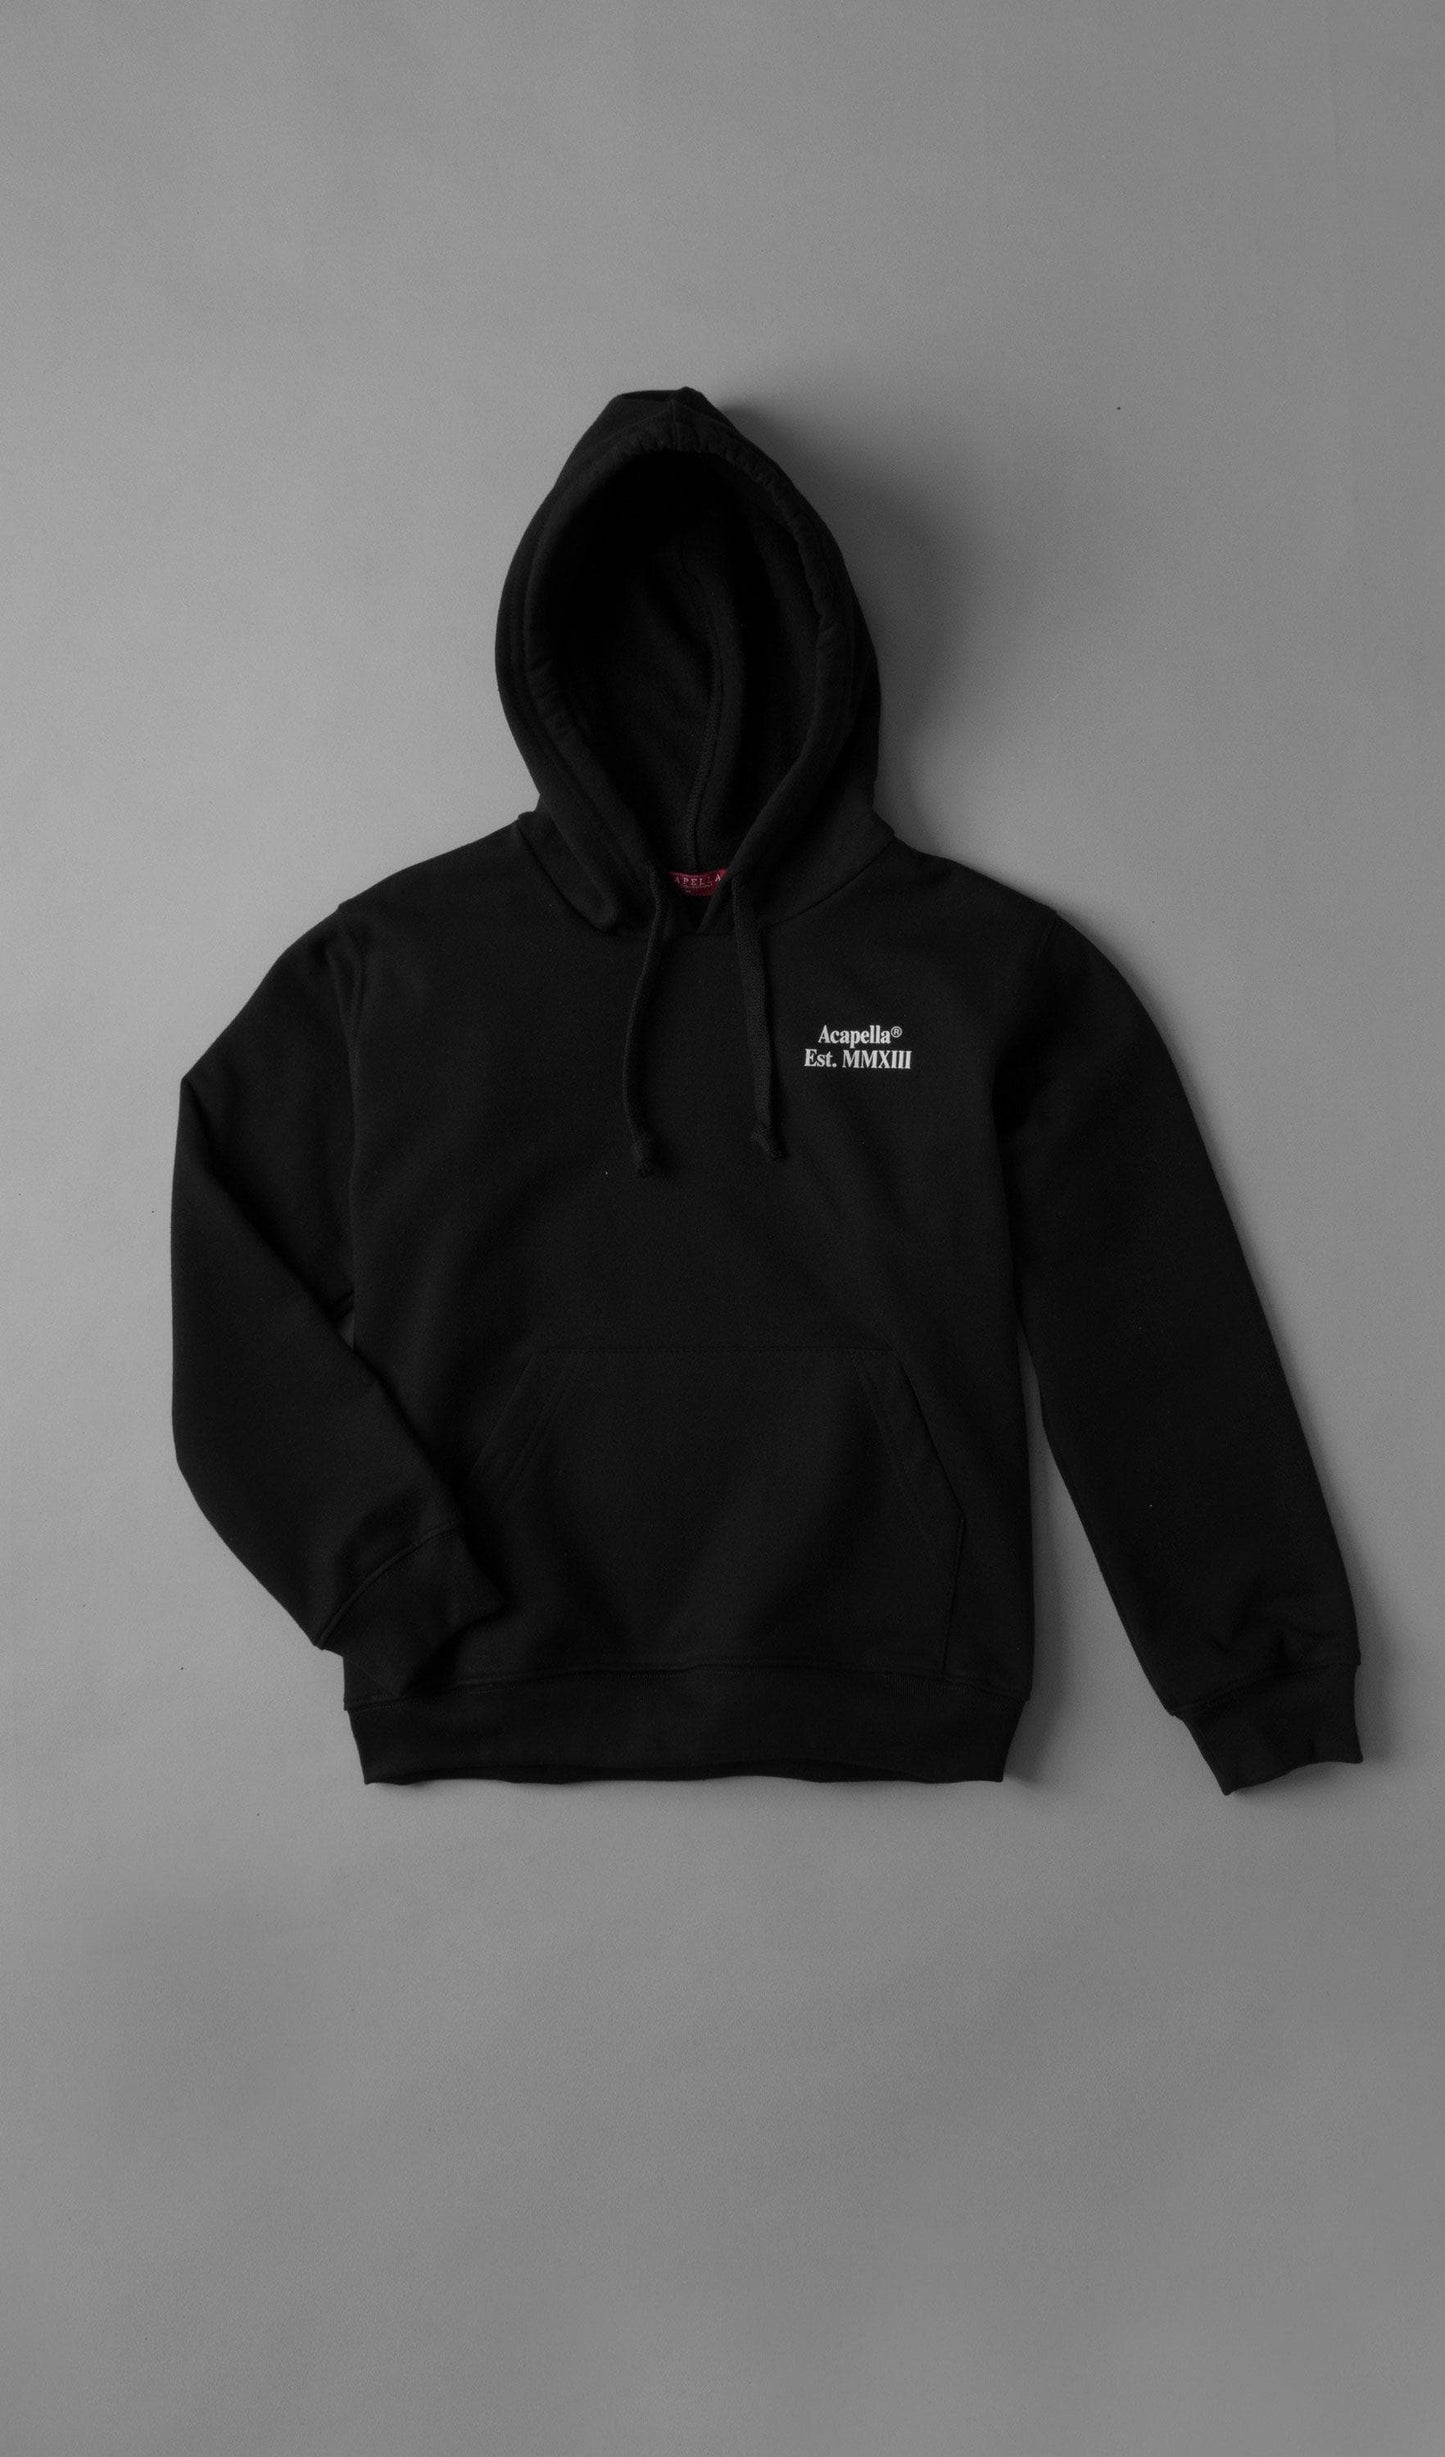 Acapella Ropa Youth Hoodie Sudadera Est. MMXIII Hoodie Youth